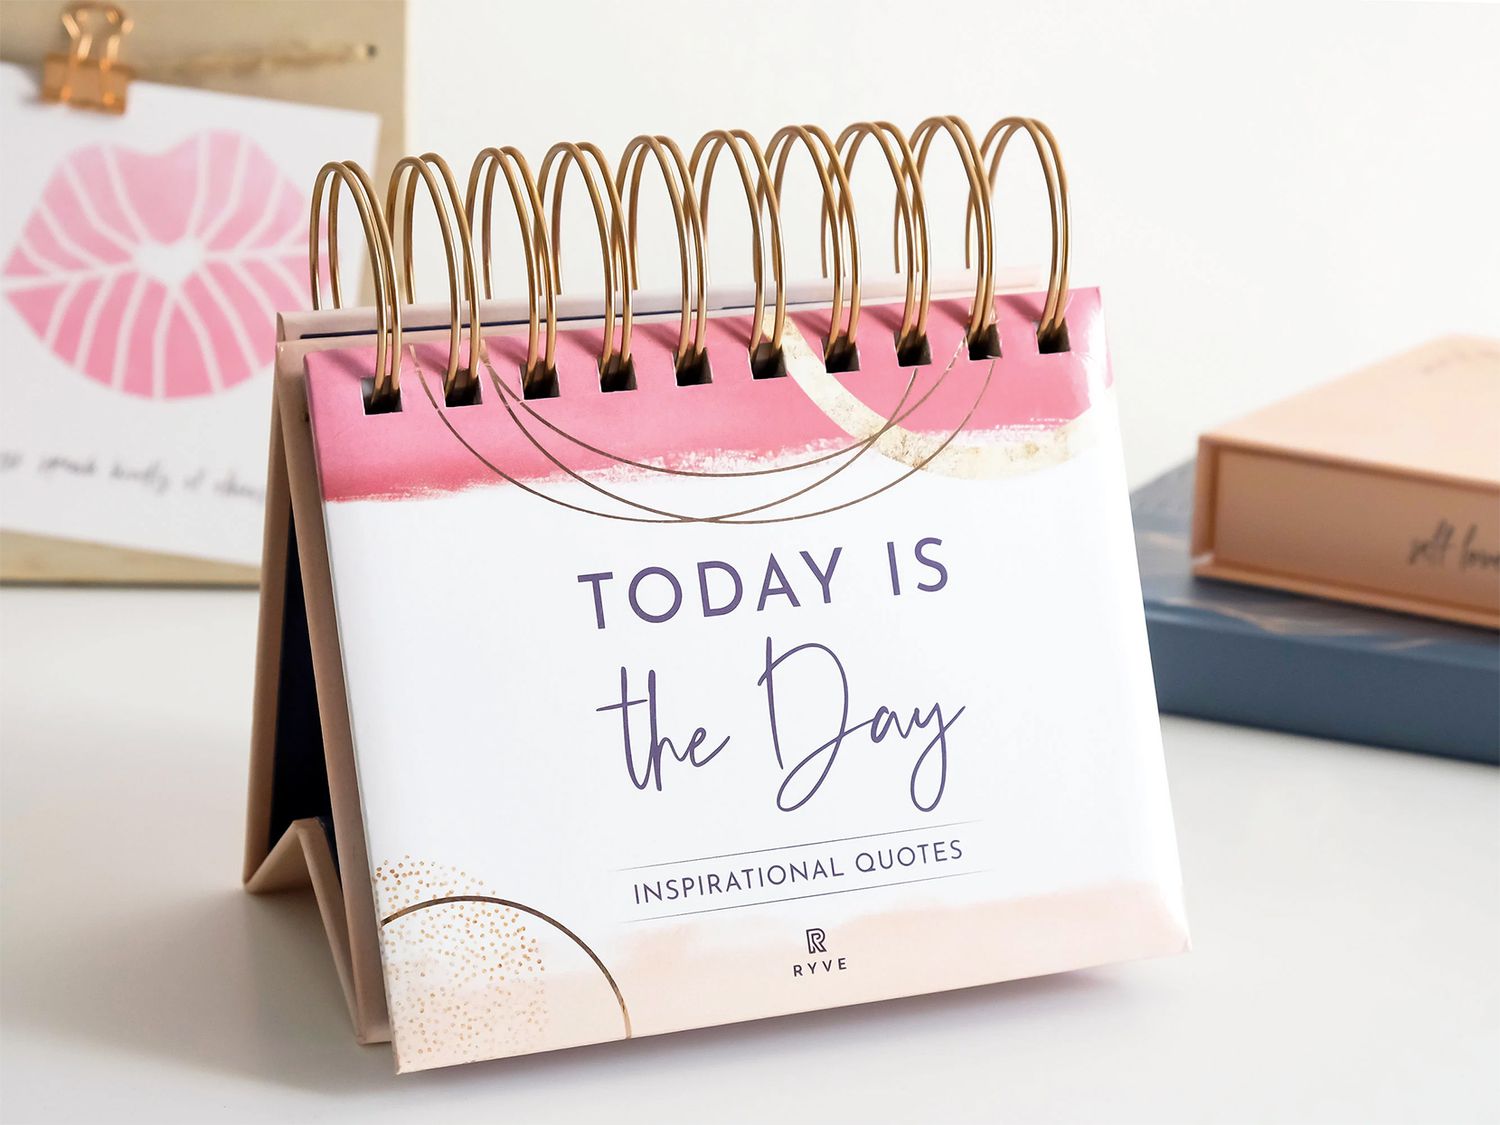 today is the day inspirational quote desk calendar